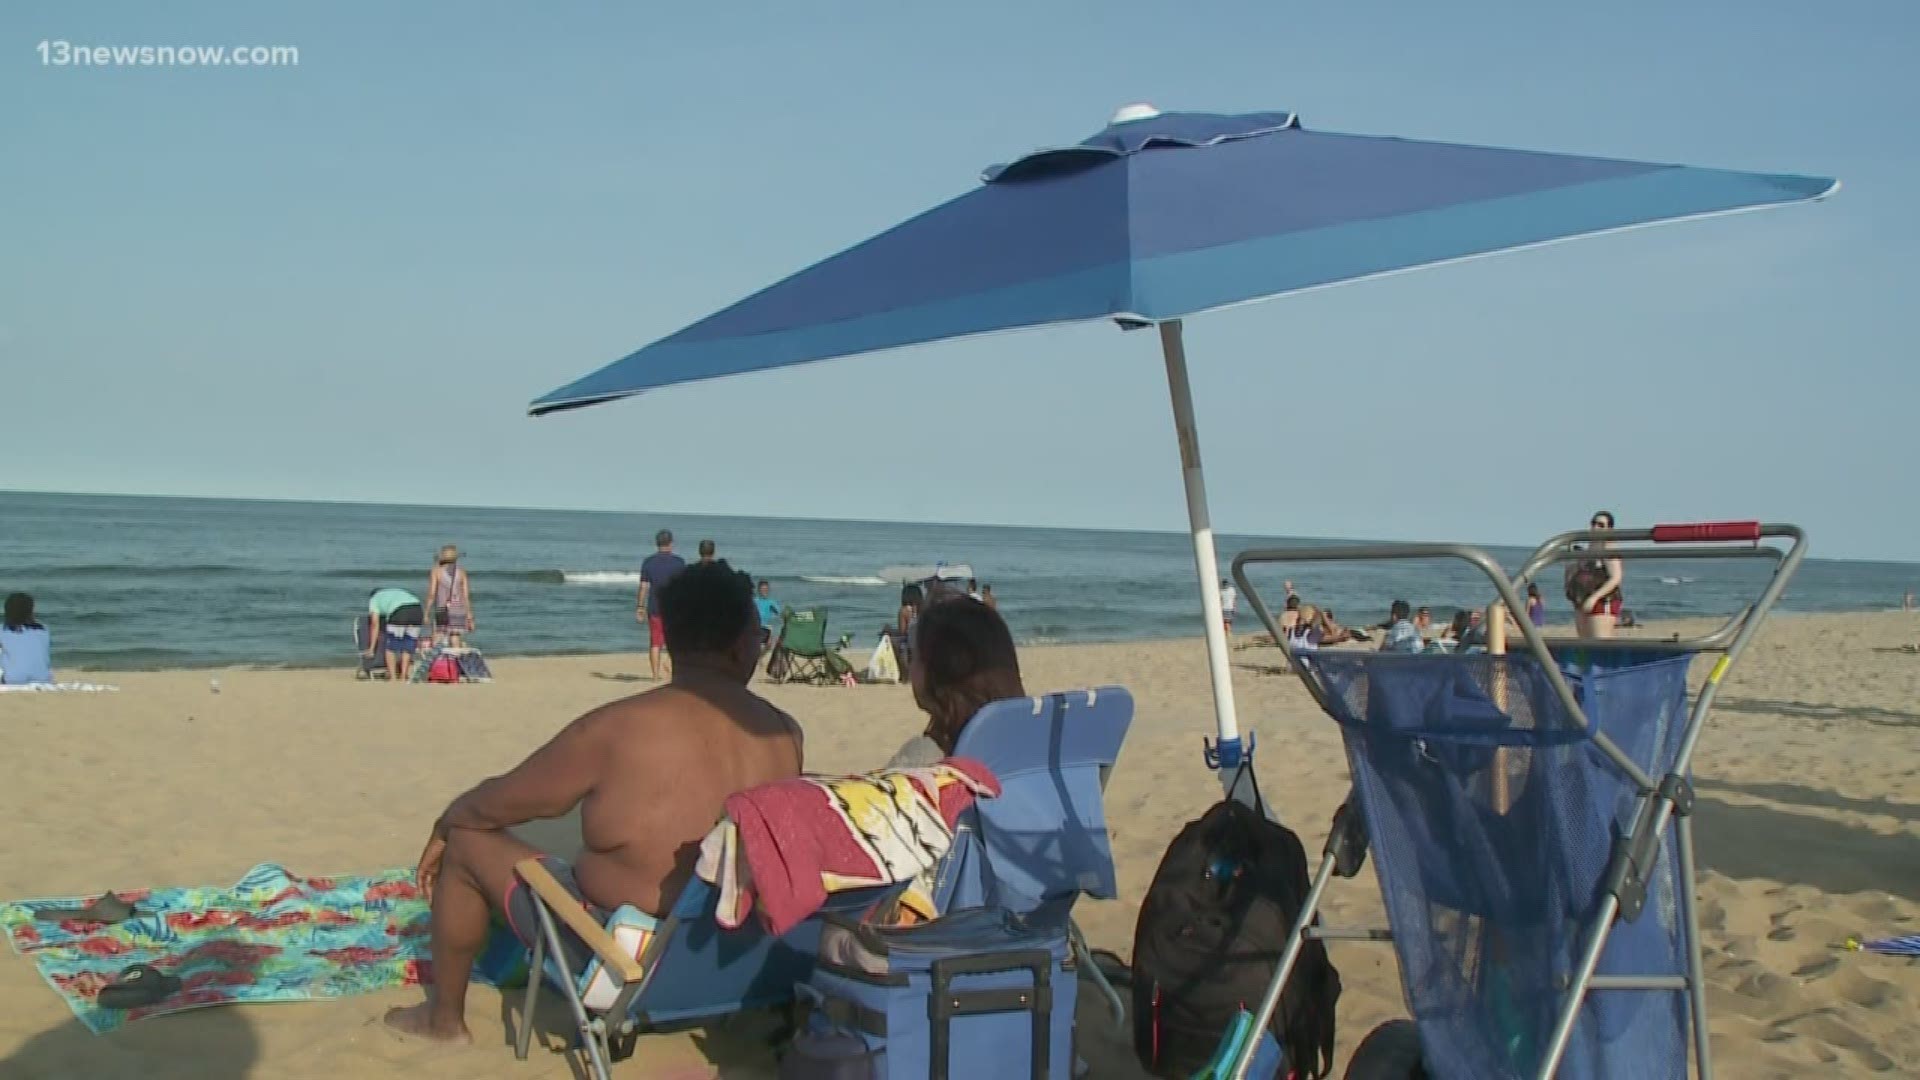 Beach umbrellas are popular among beachgoers, but one gust of wind can turn it into a flying spear if they're not installed correctly.